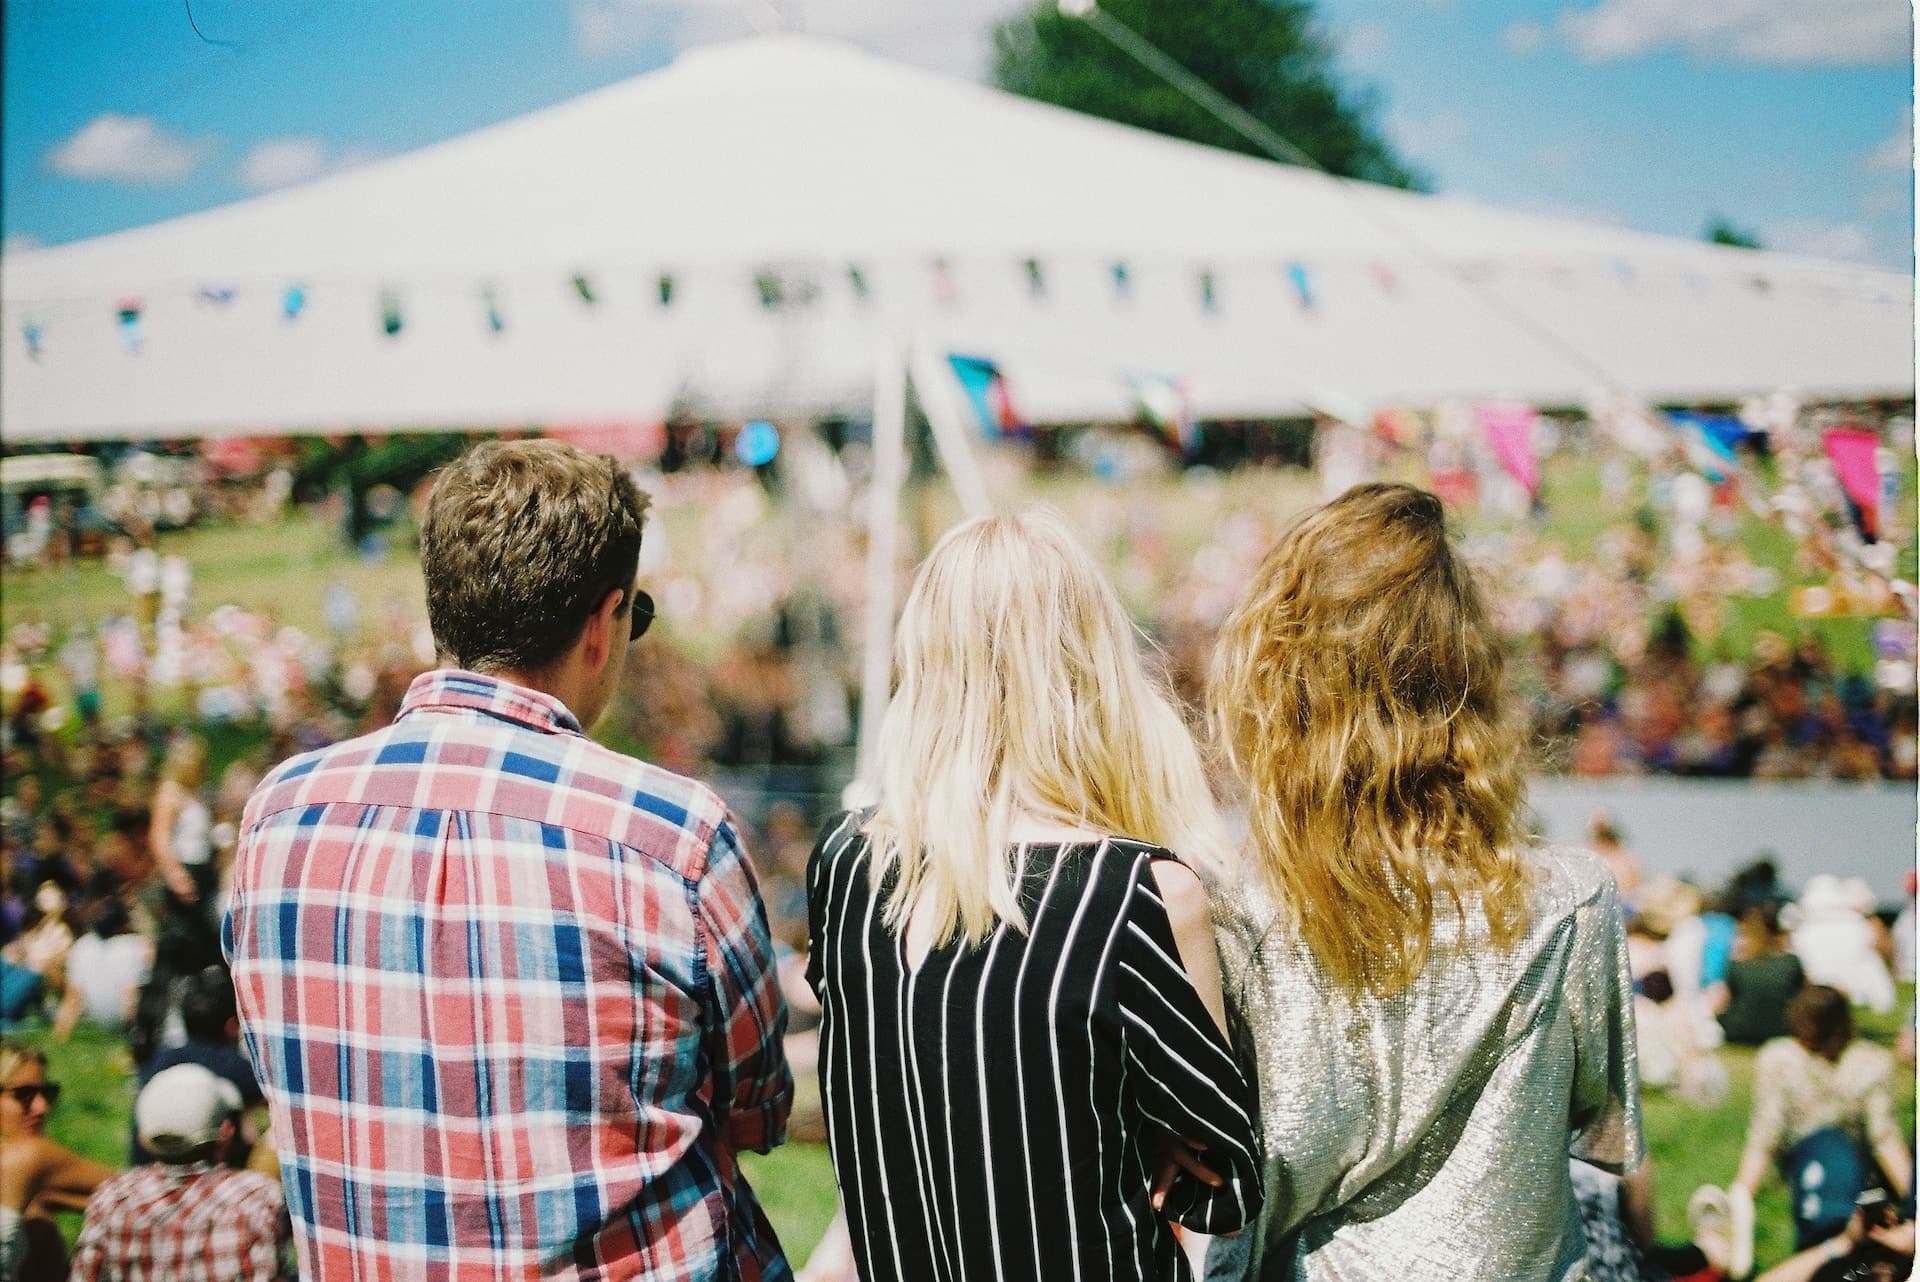 festival attendees at a large outdoor festival event